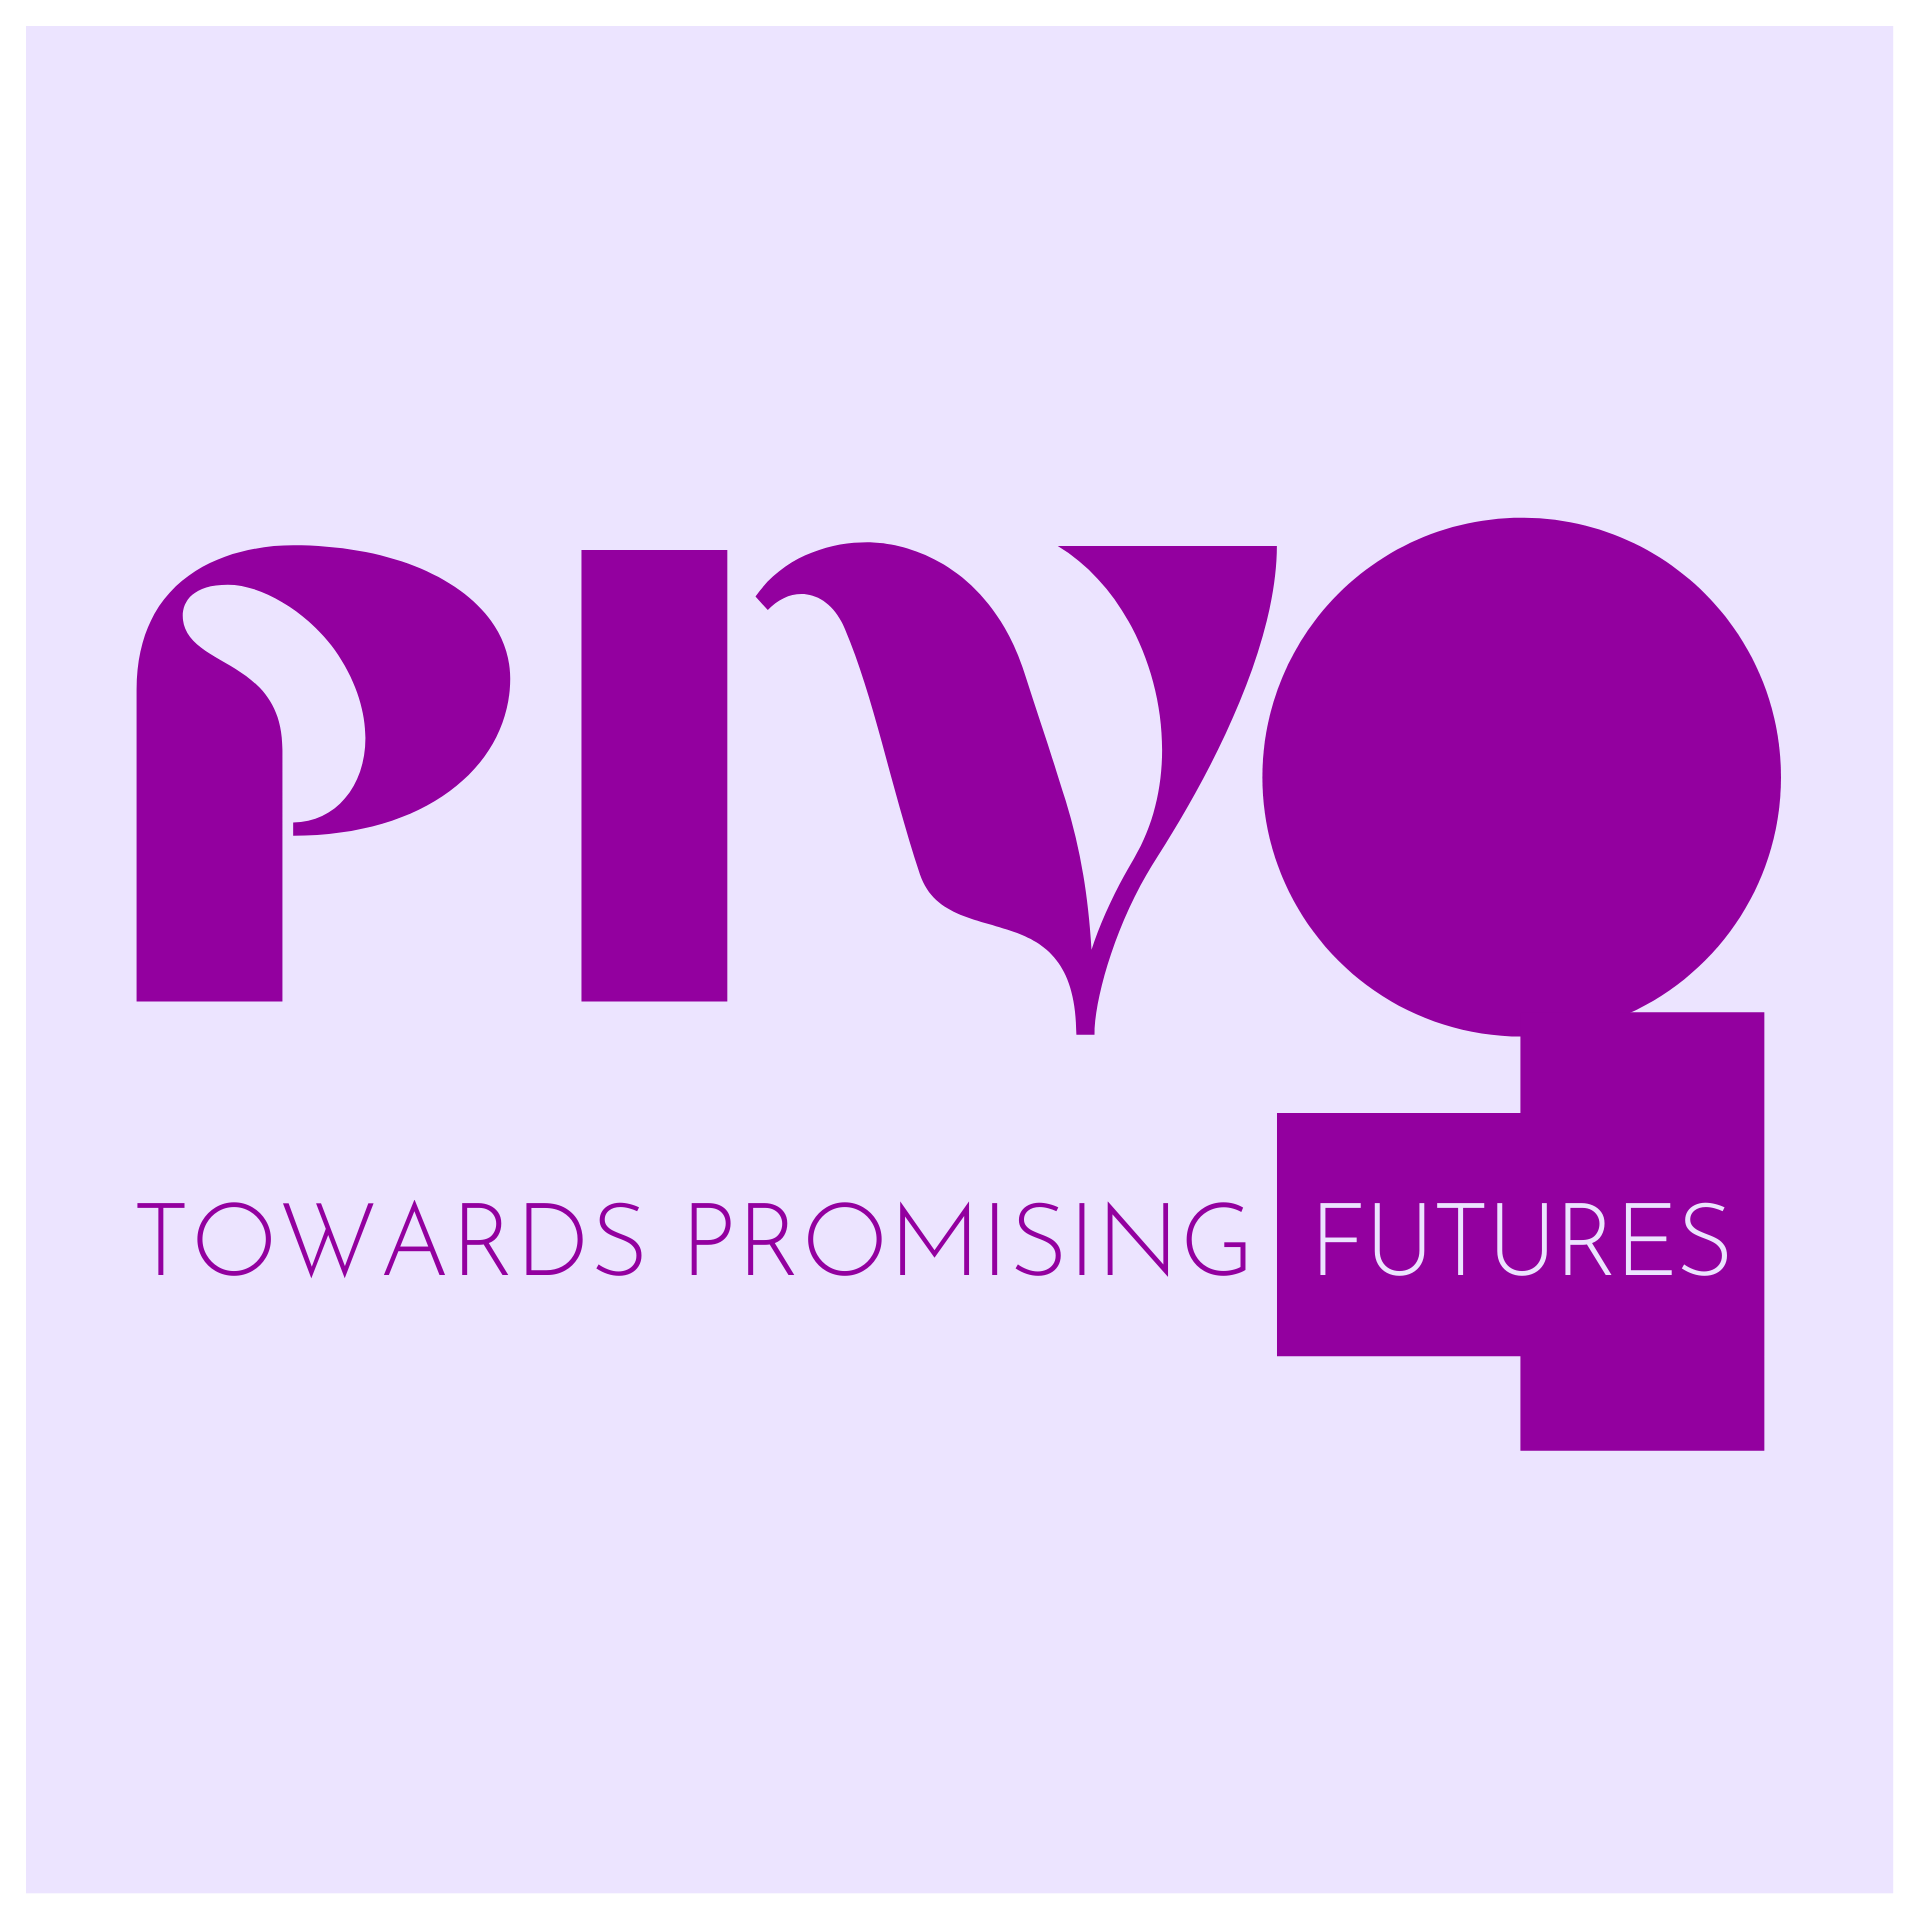 The PIVOT Towards Promising Futures logo states the title in purple over a lavender background.